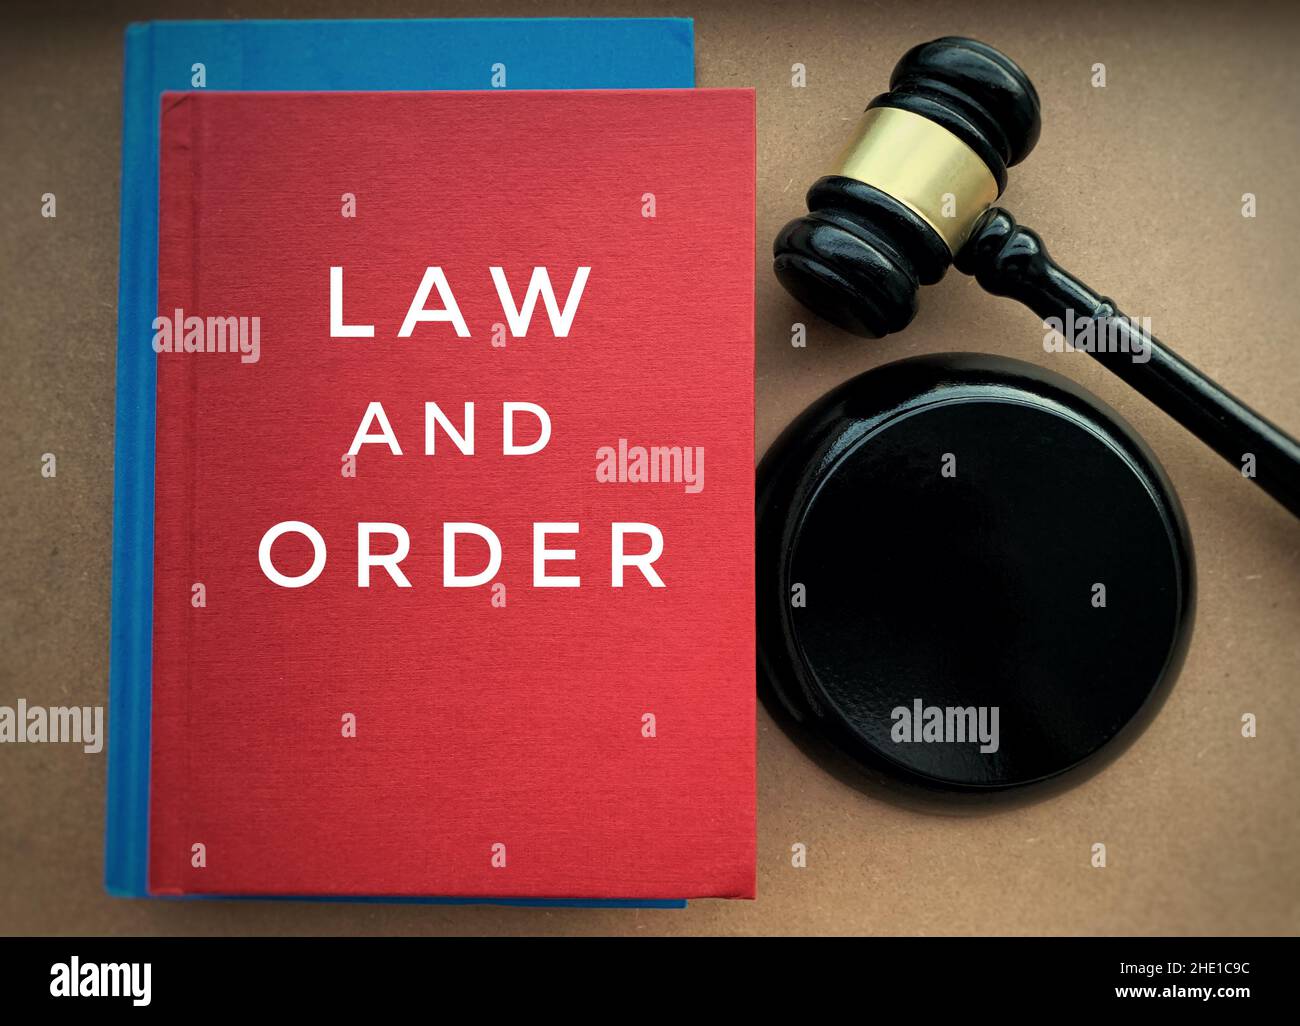 Law and order text on book cover with gavel hammer background. Law concept Stock Photo